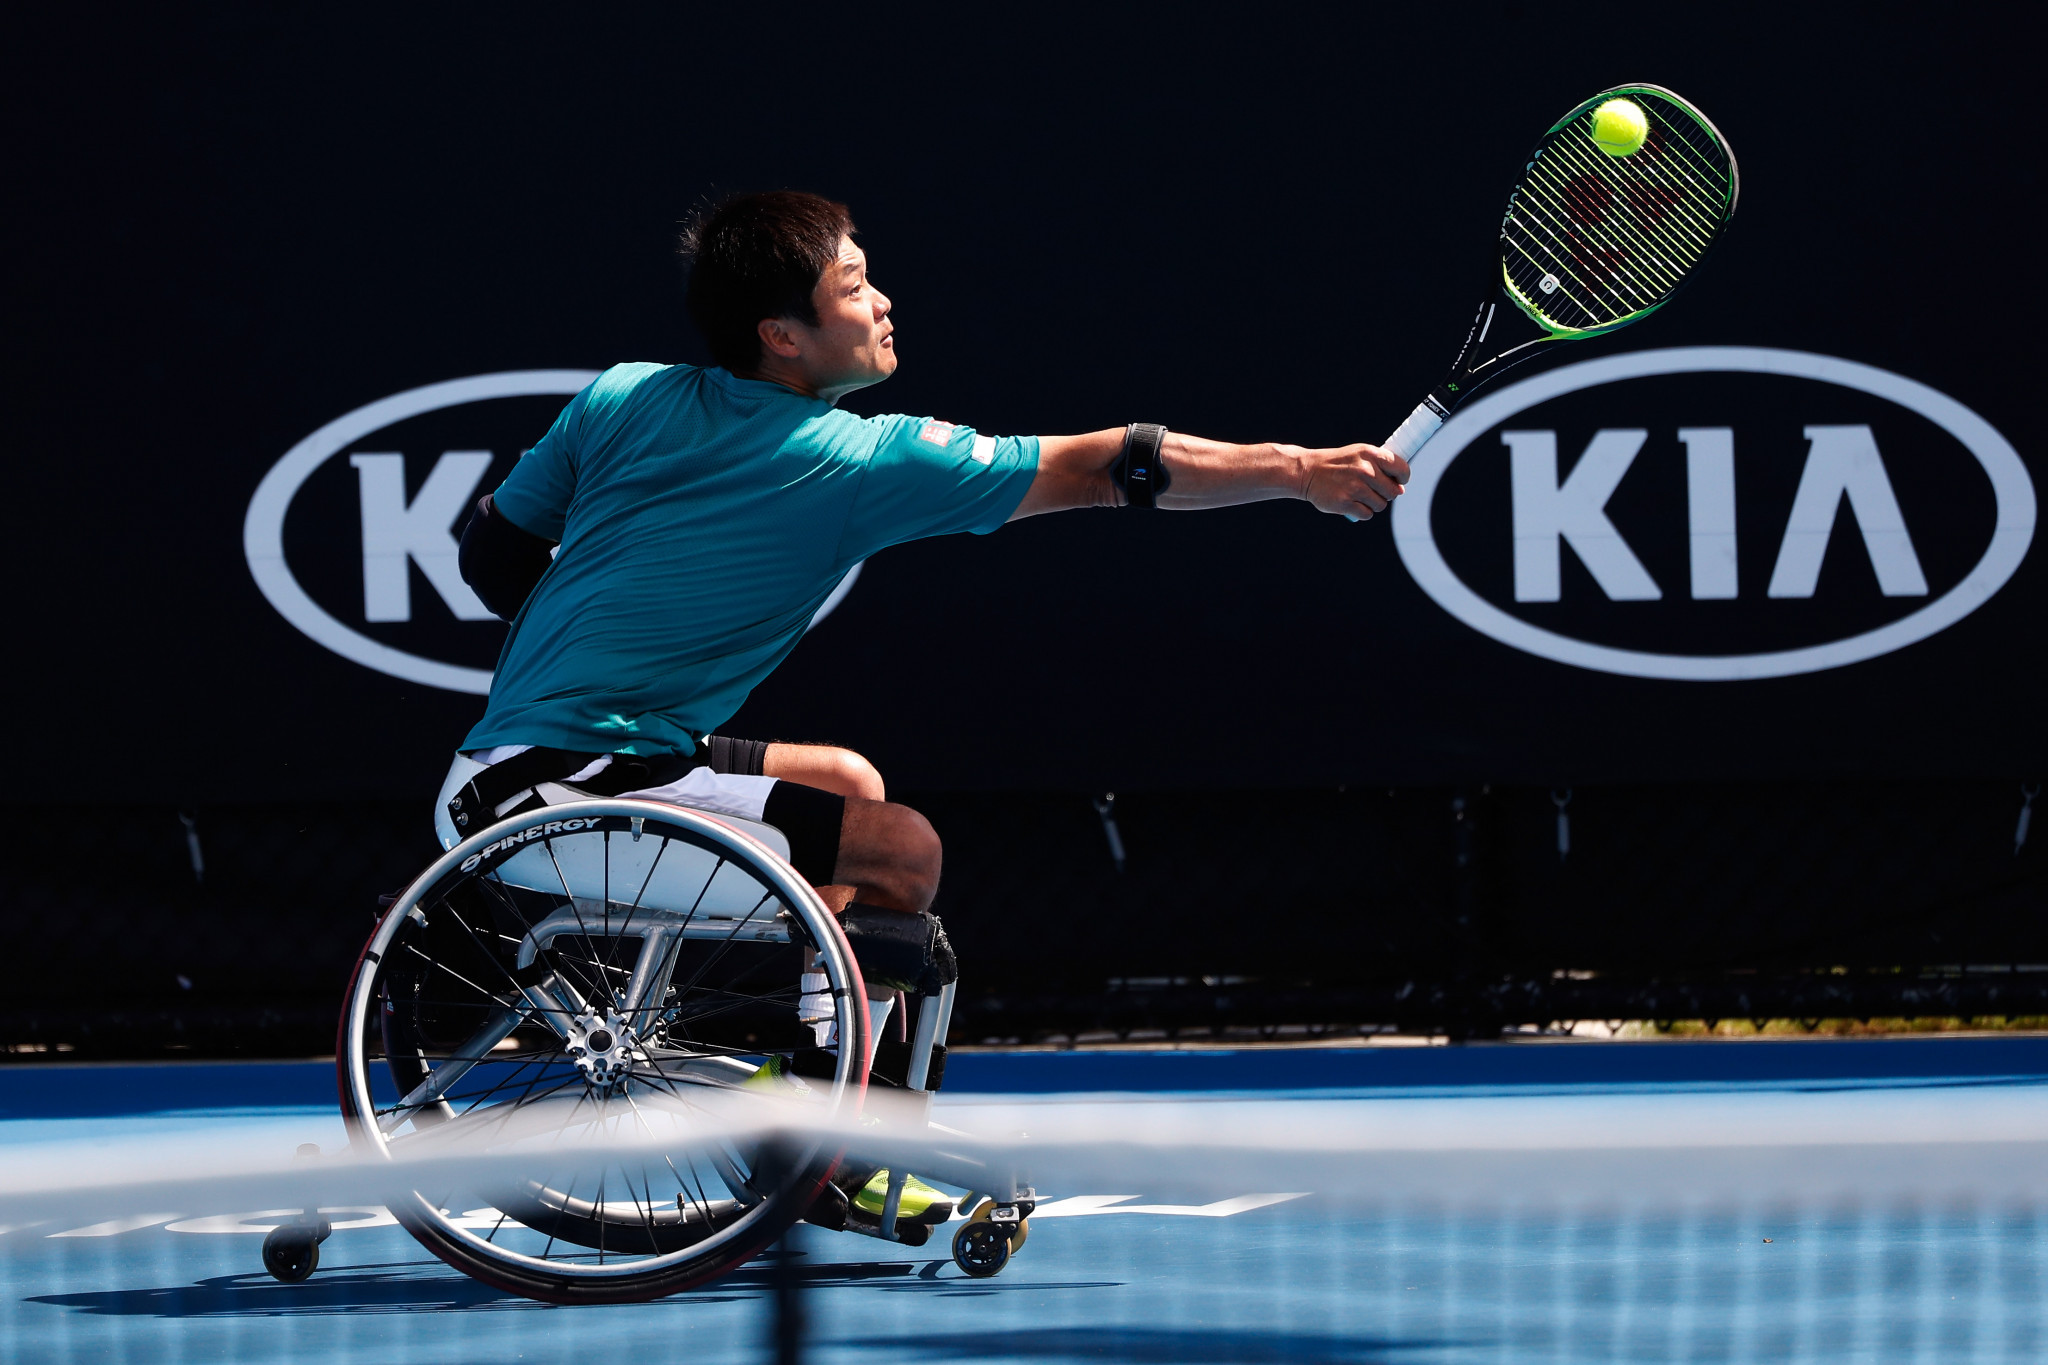 Defending champion Shingo Kunieda of Japan beat Britain's Alfie Hewett in his opening match of the Australian Open wheelchair competition ©Getty Images